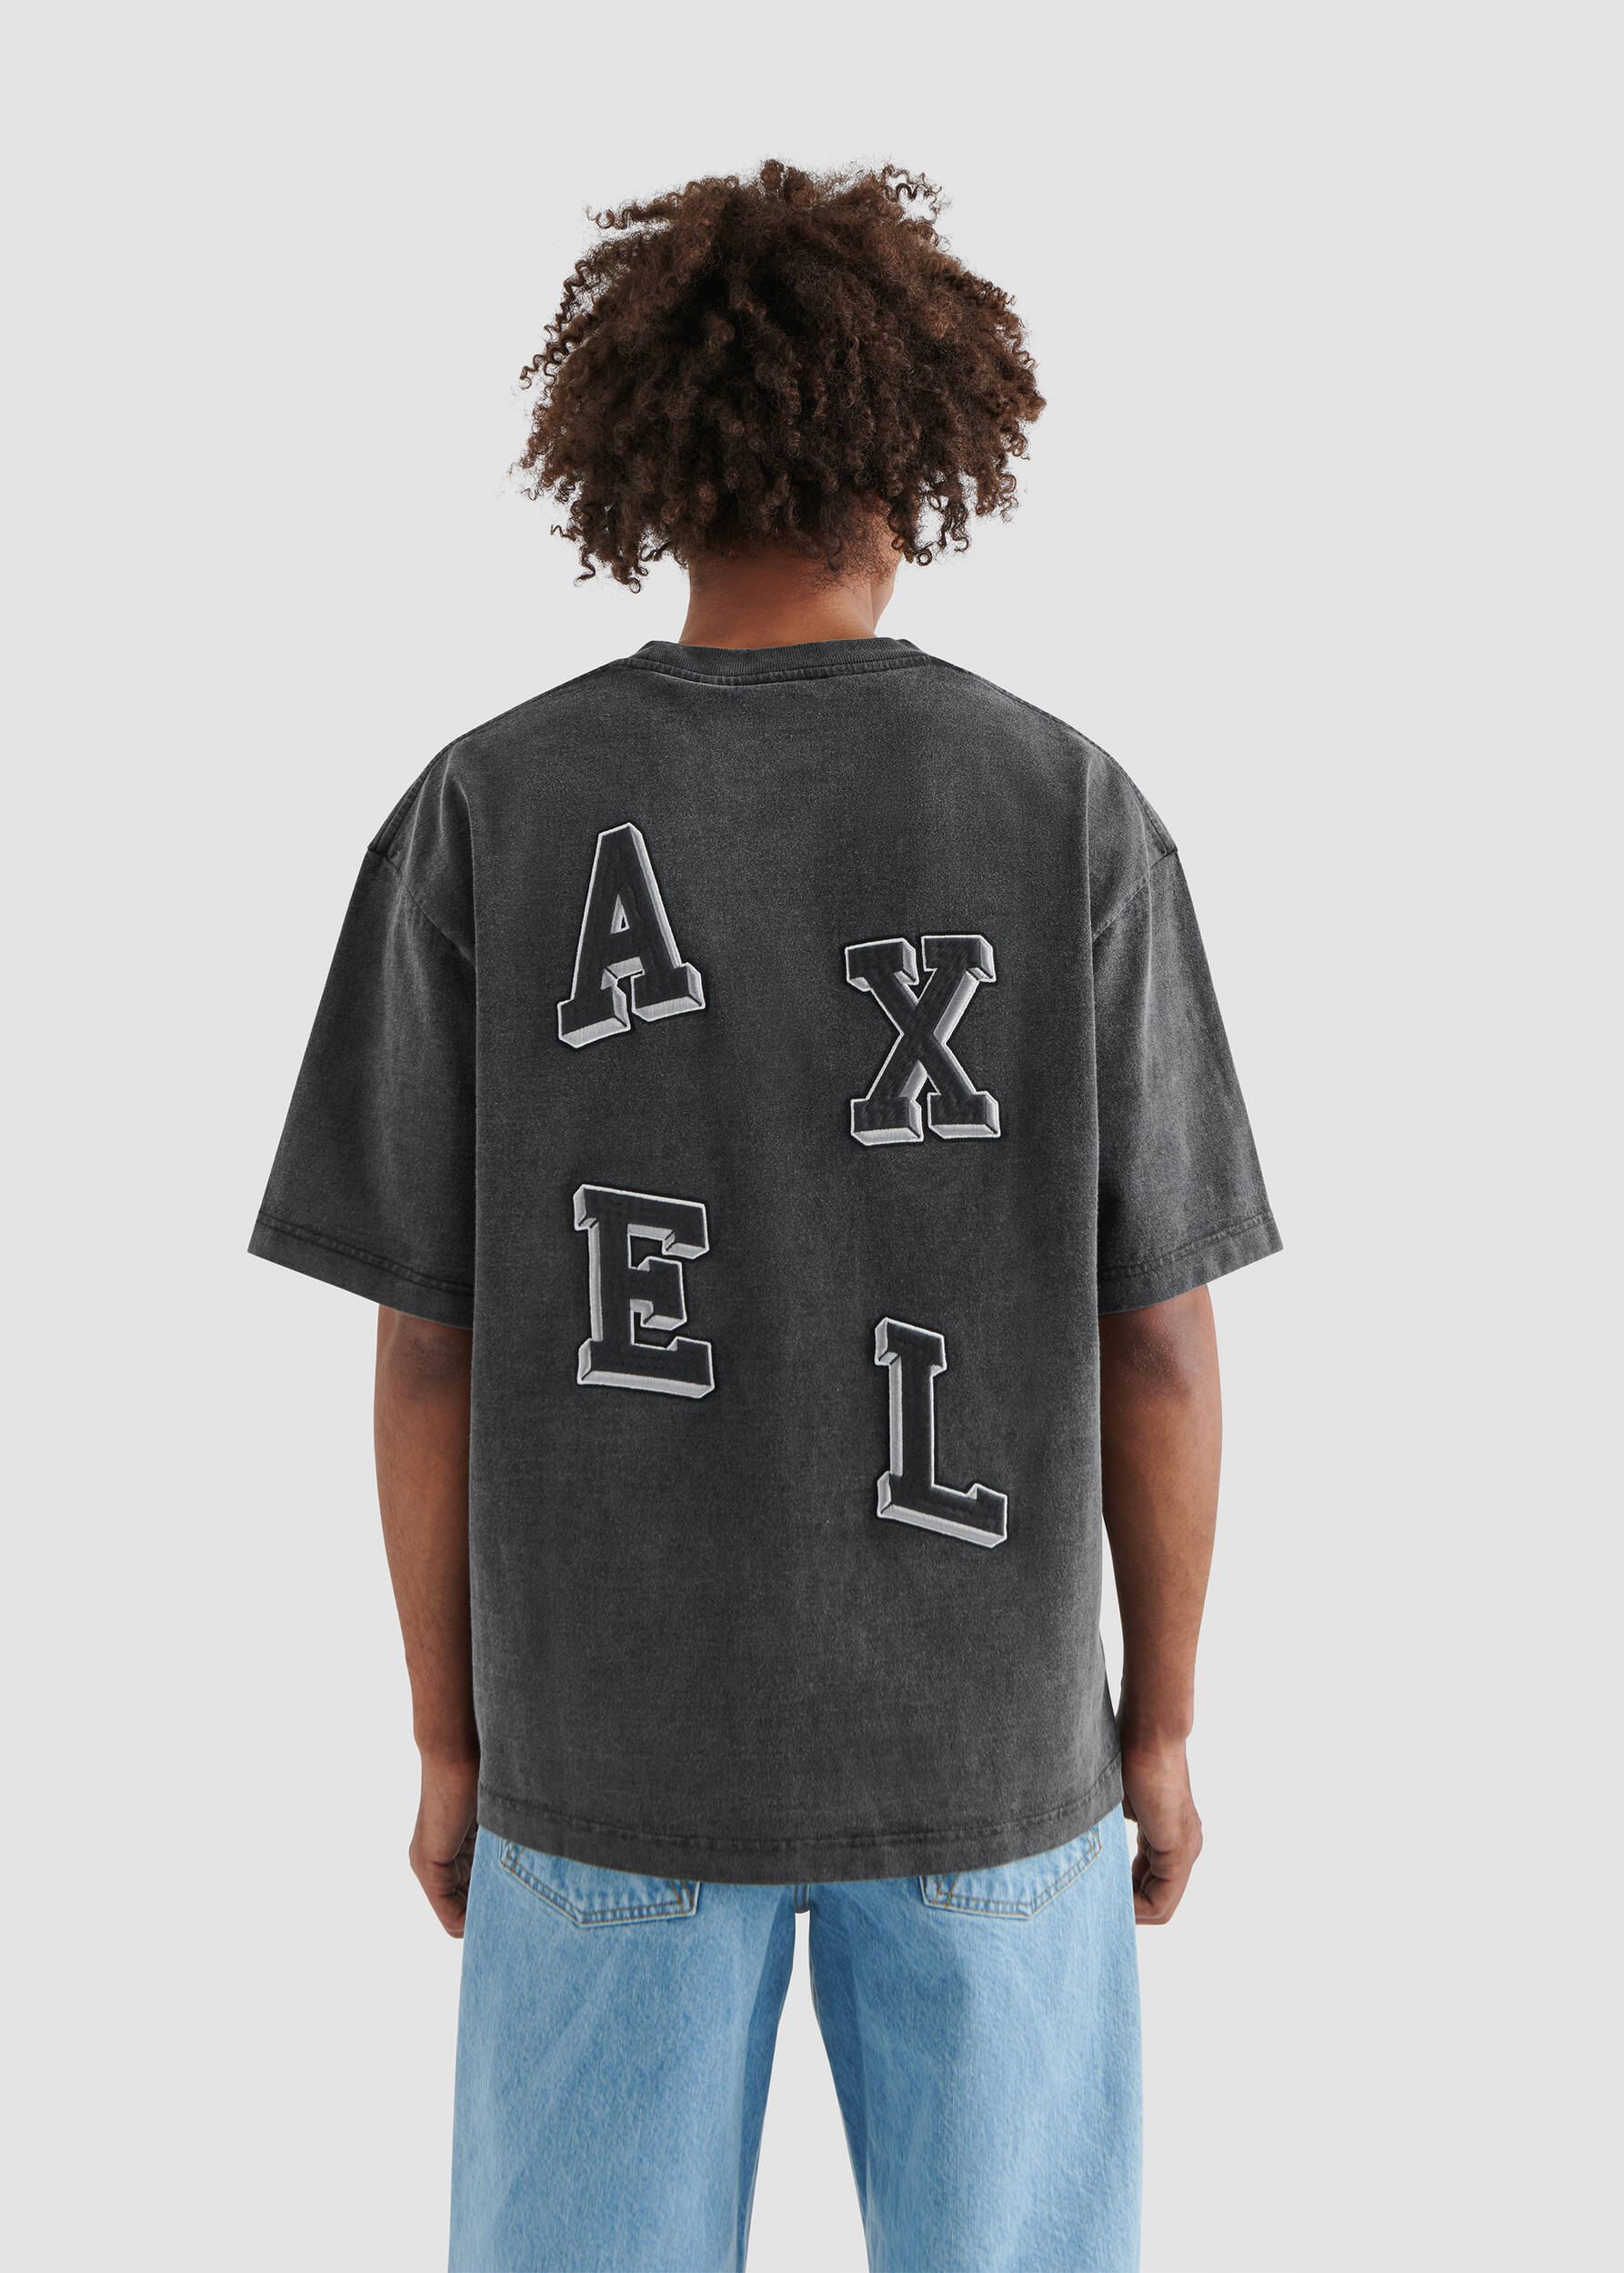 Typo Embroidered T-Shirt